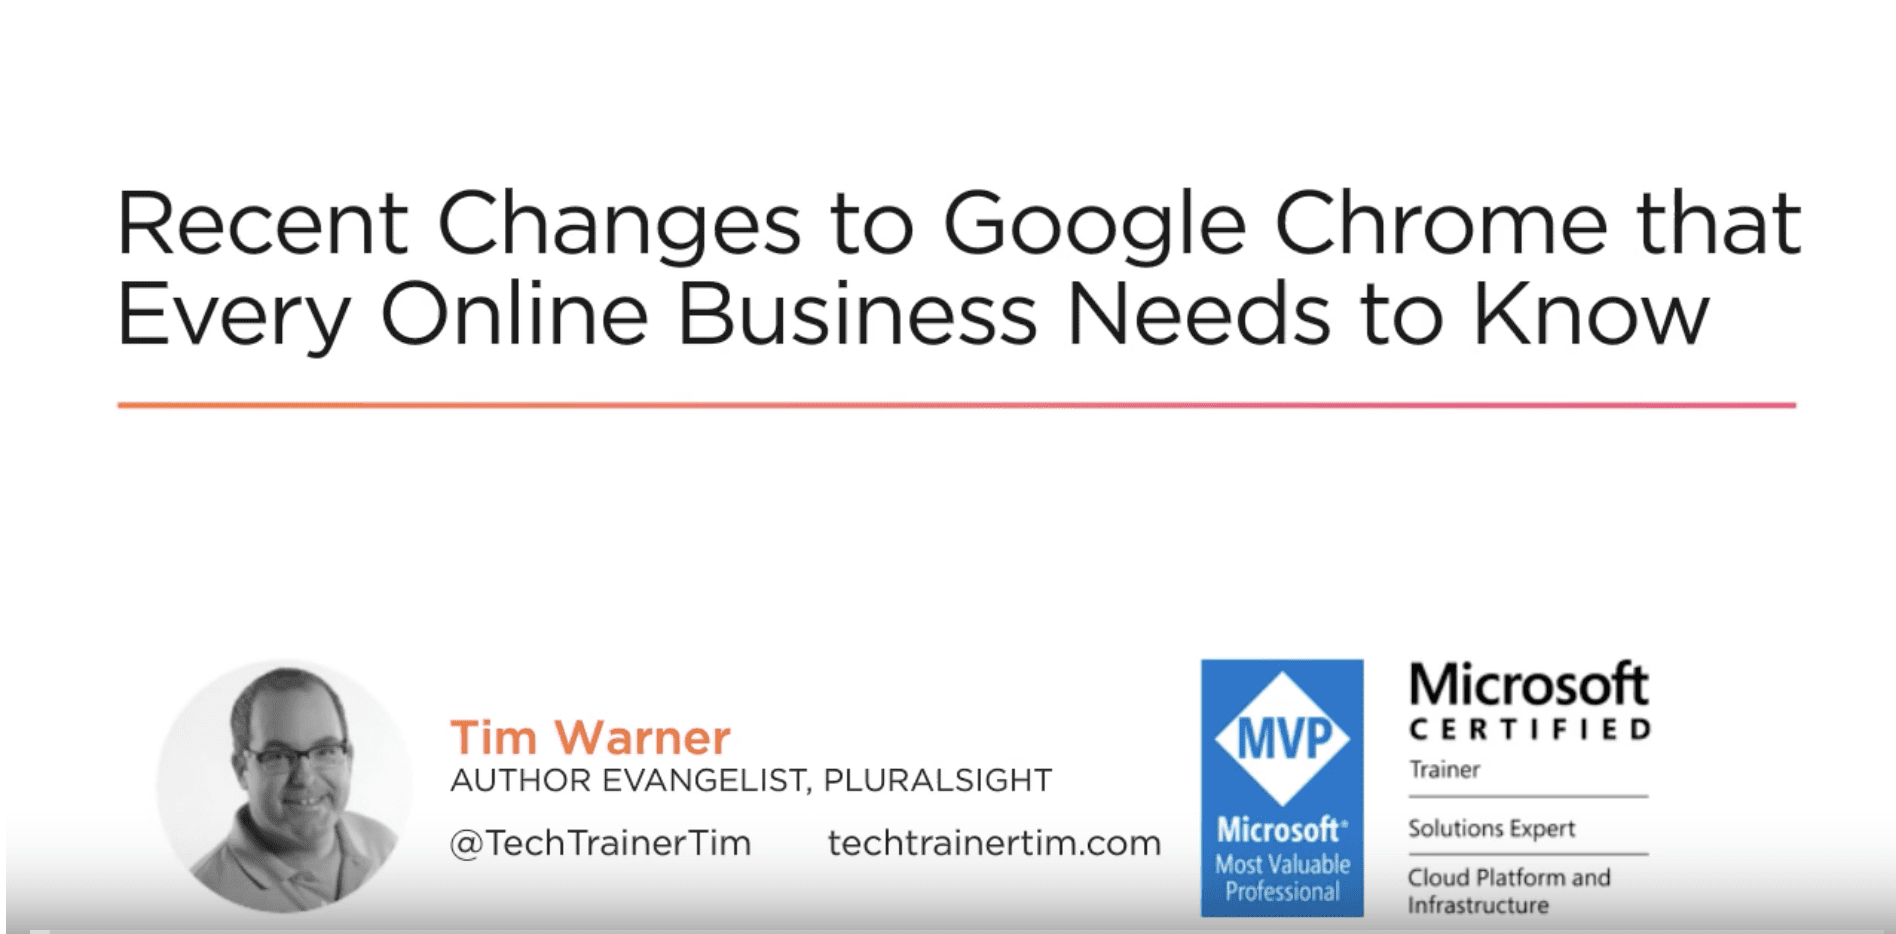 Recent Changes Image to Google Chrome that every online business needs to know